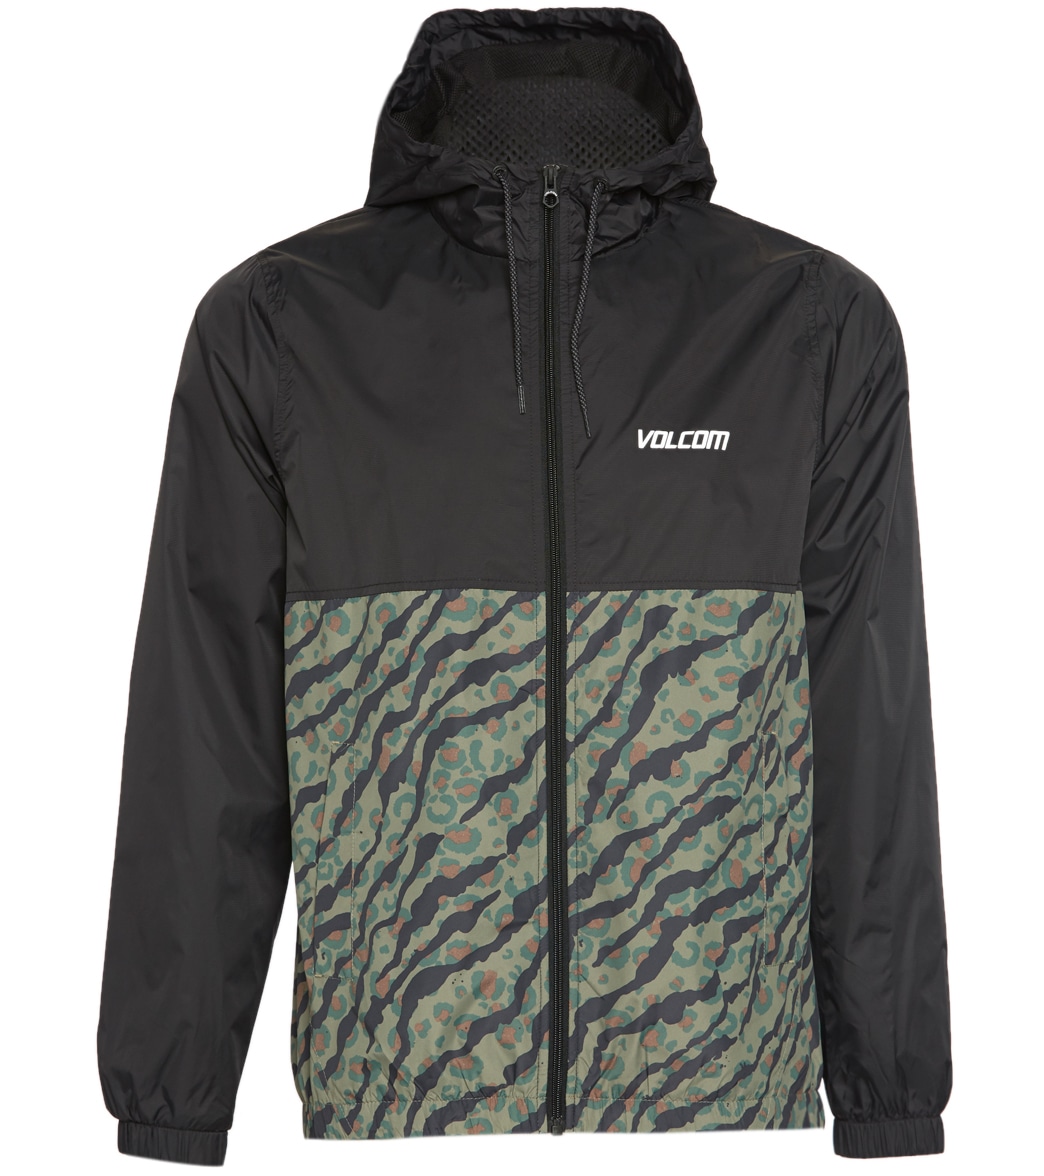 Volcom Men's Ermont Hooded Windbreaker Jacket - Camouflage Black Small Polyester - Swimoutlet.com